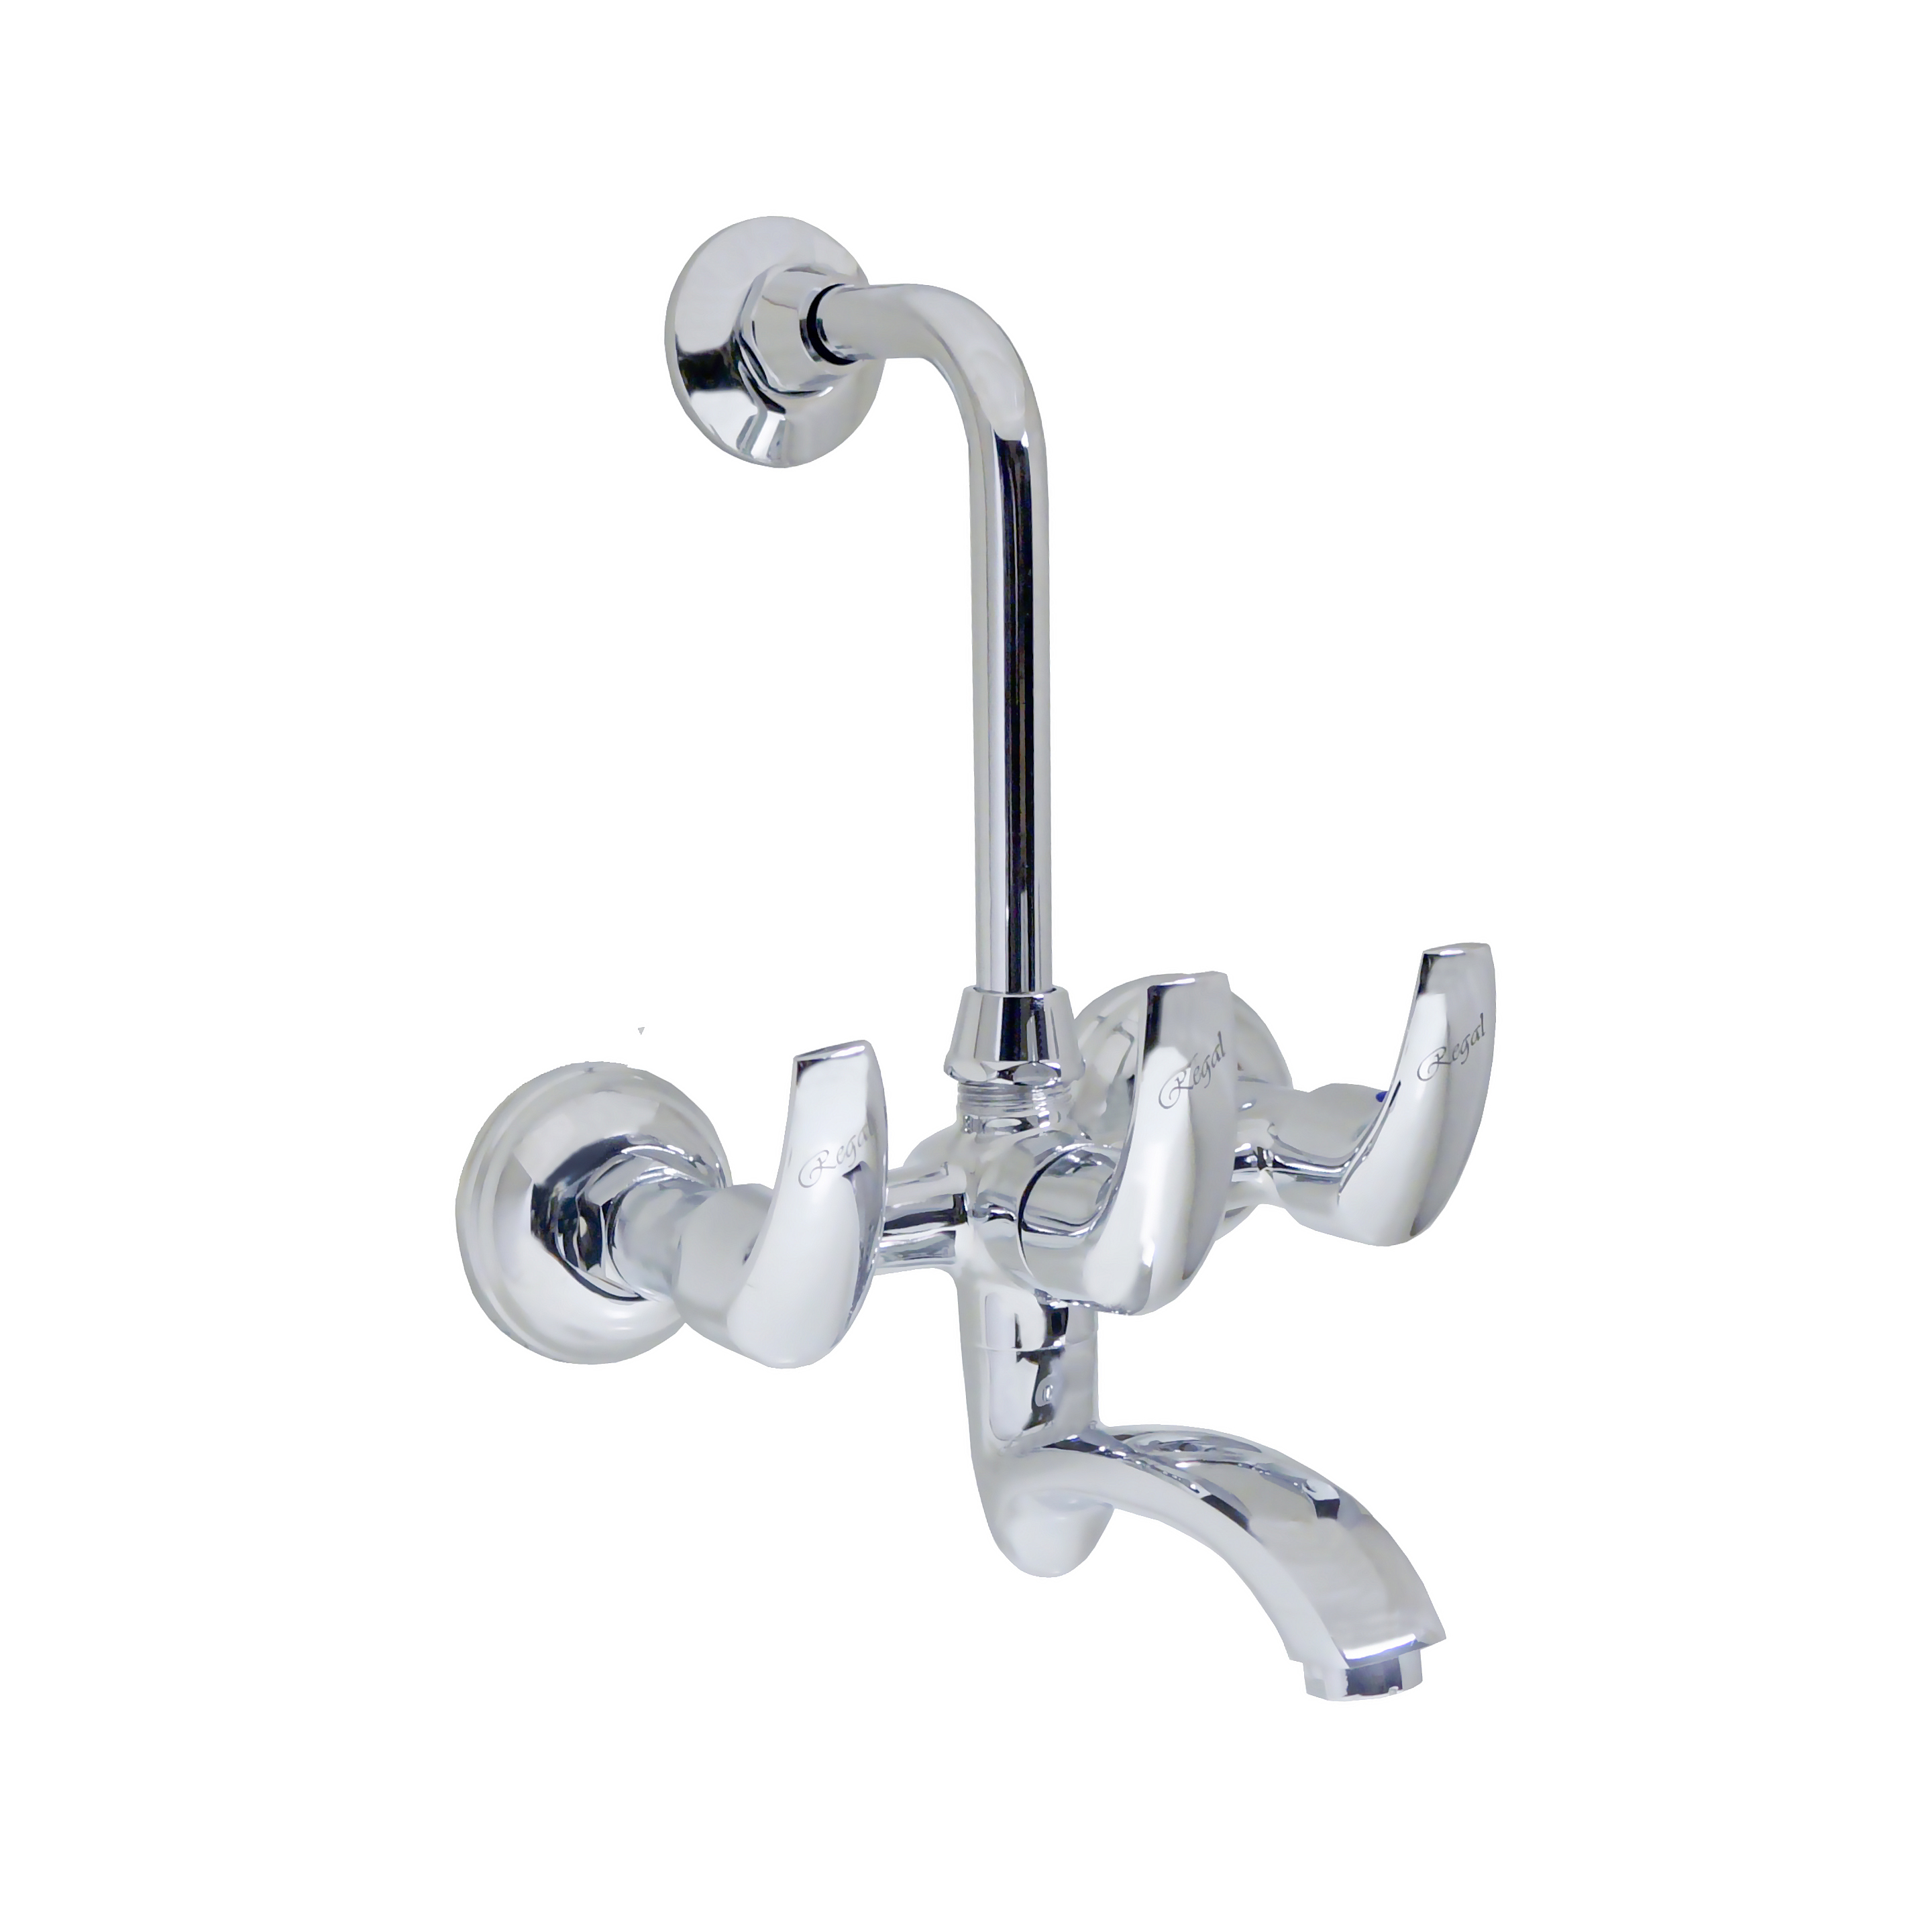 Frey Wall Mixer With Provision For Overhead Shower With Bend Pipe & Wall Flange